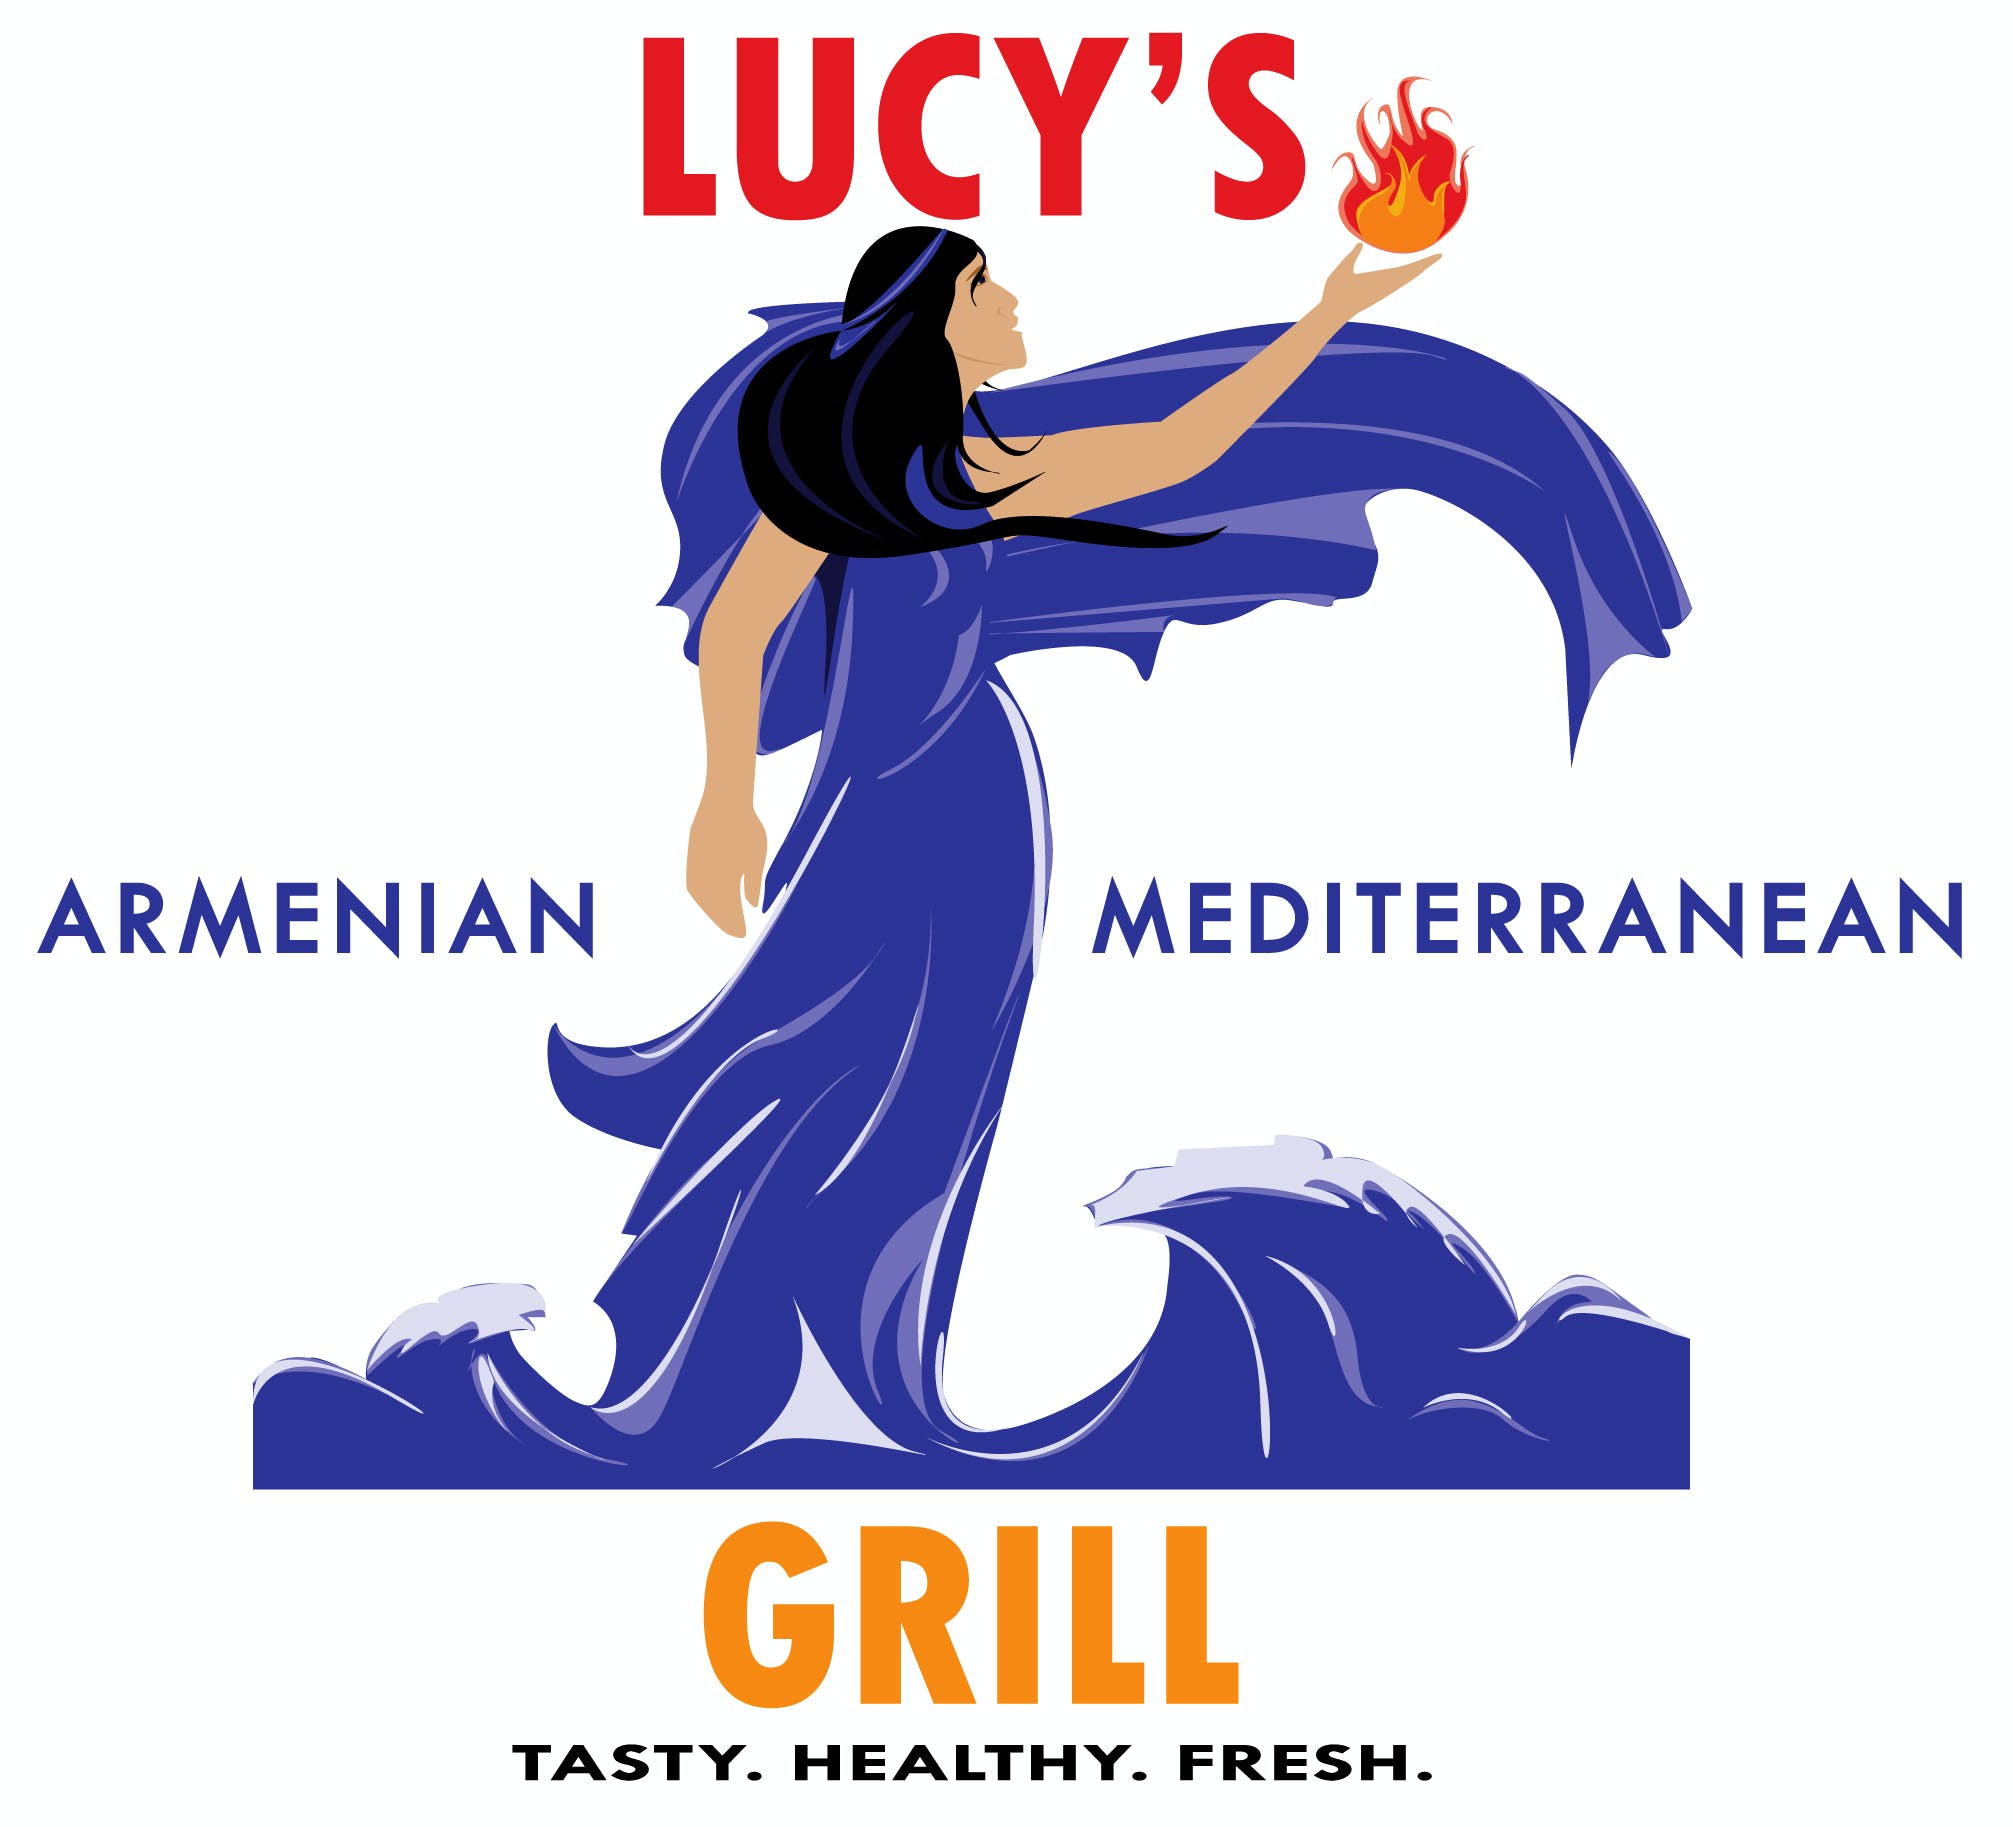 Lucy's Grill